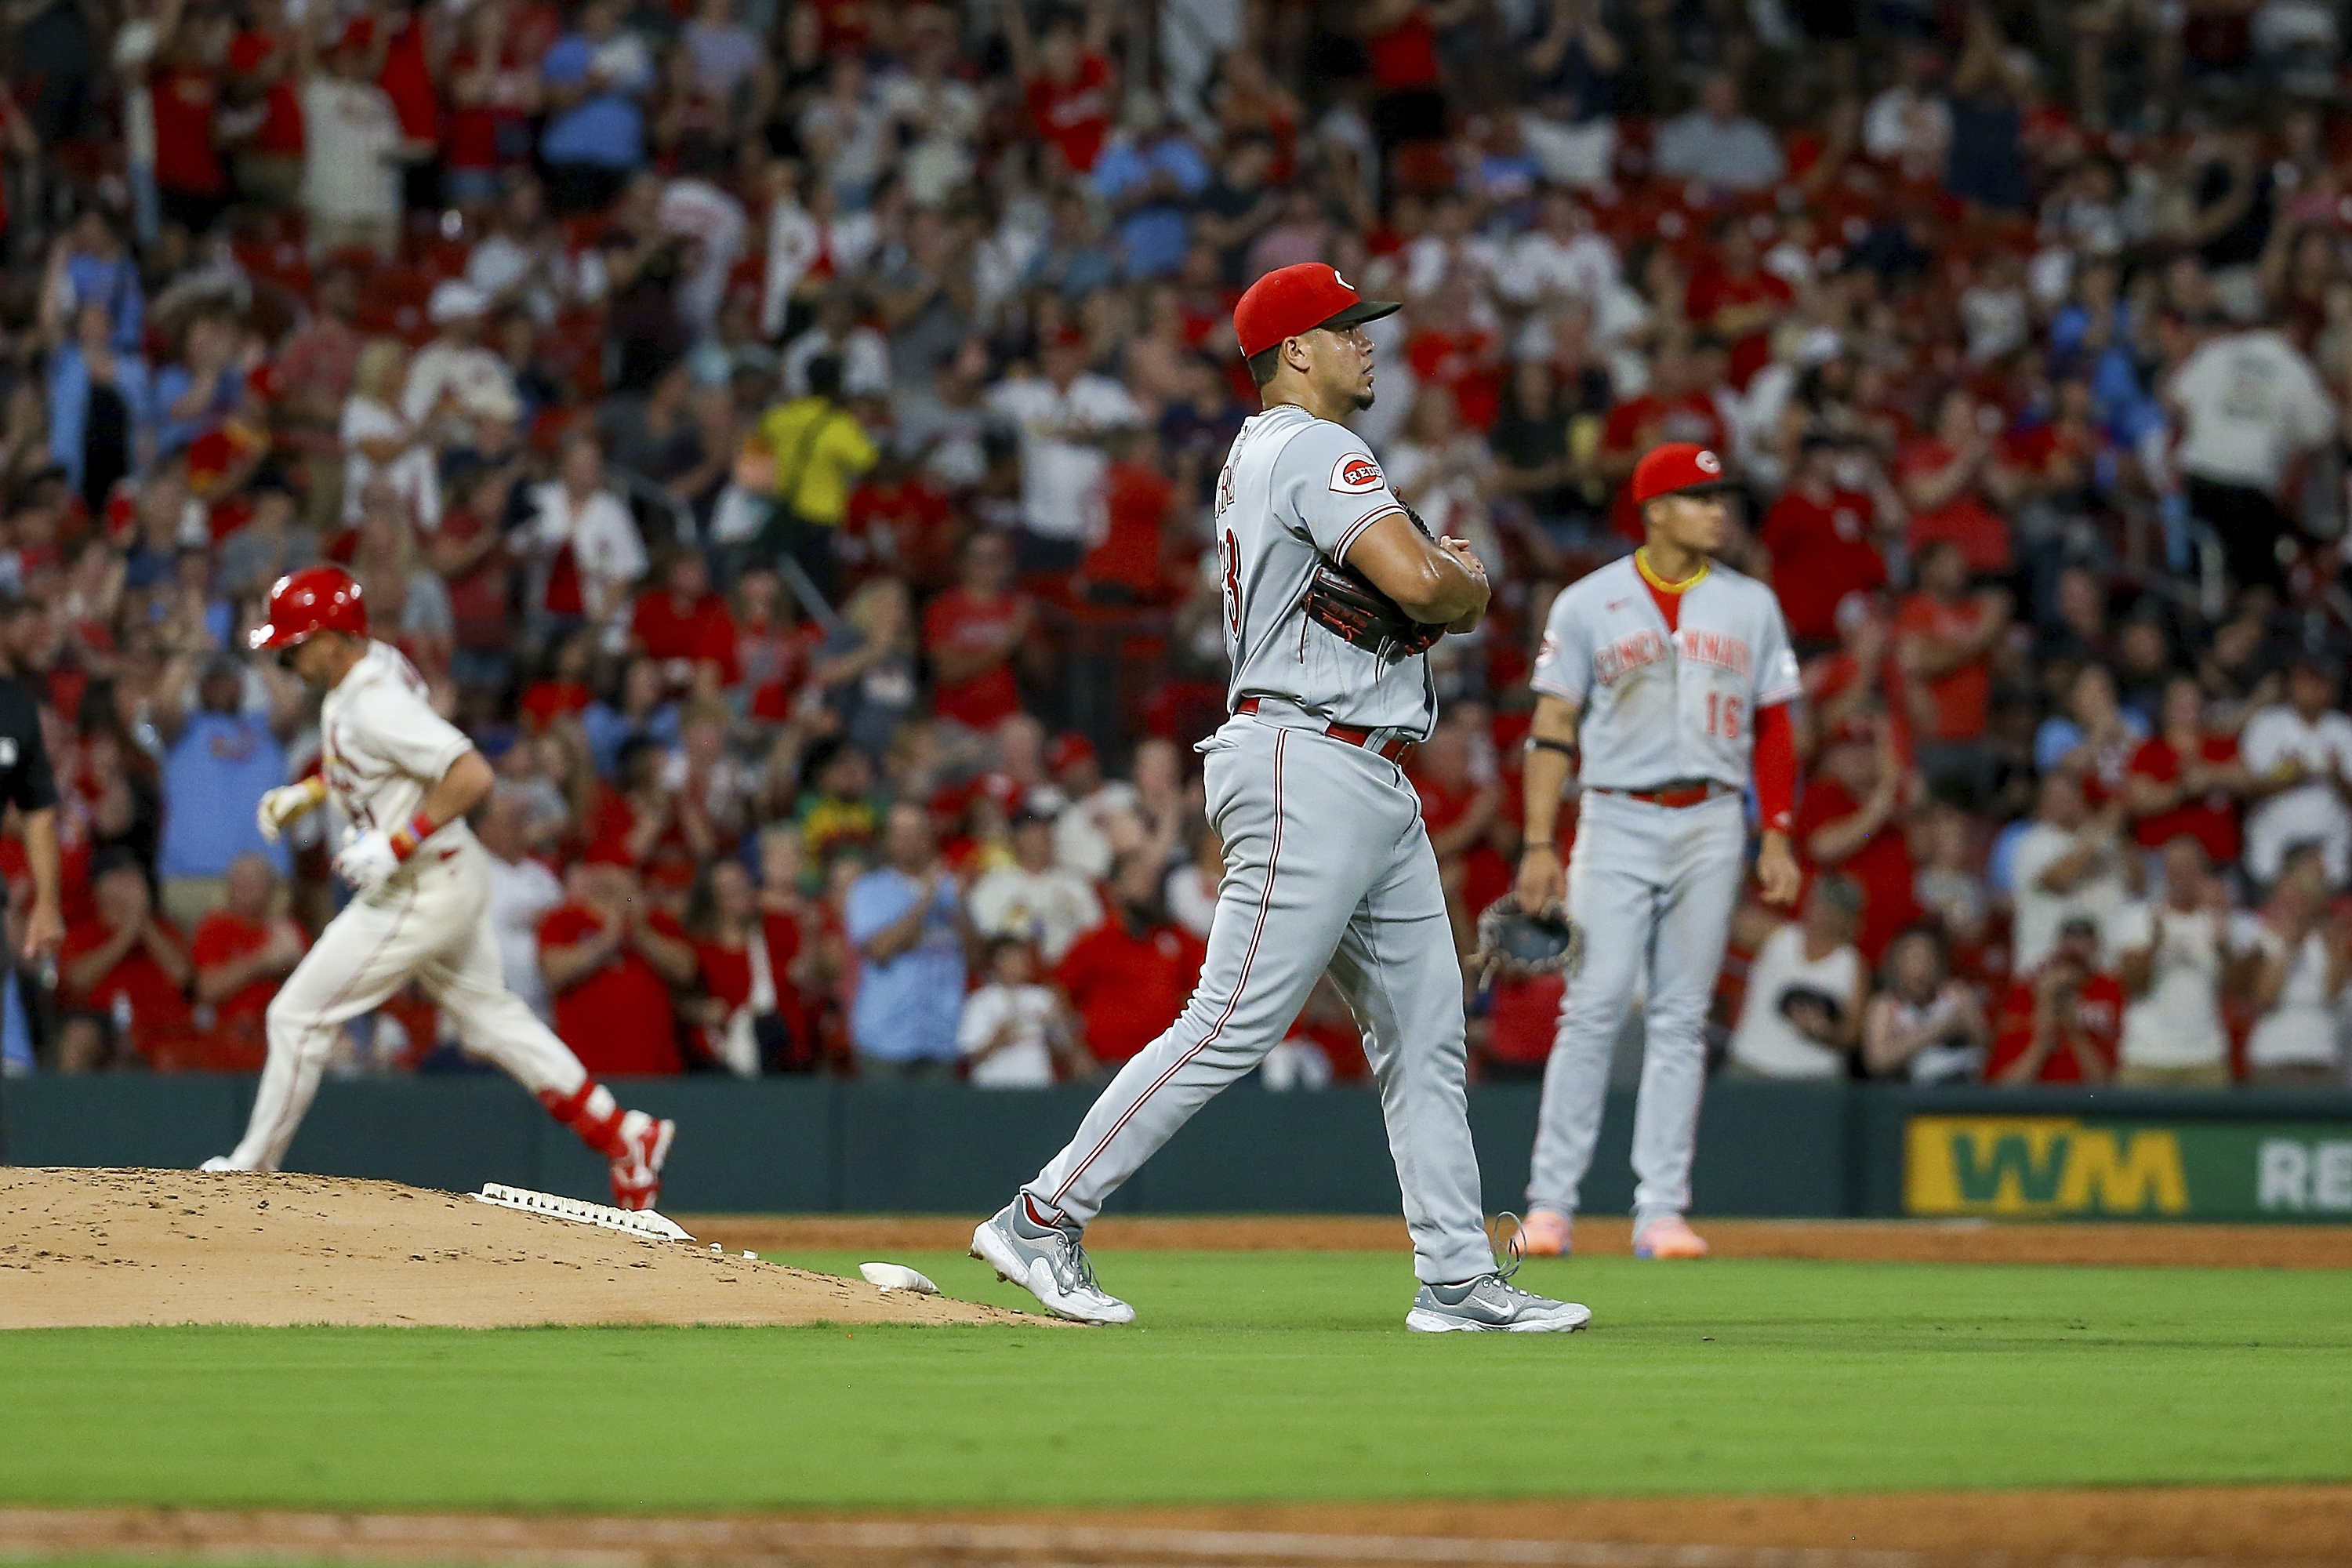 Reds close gap on Cardinals with 10th inning win